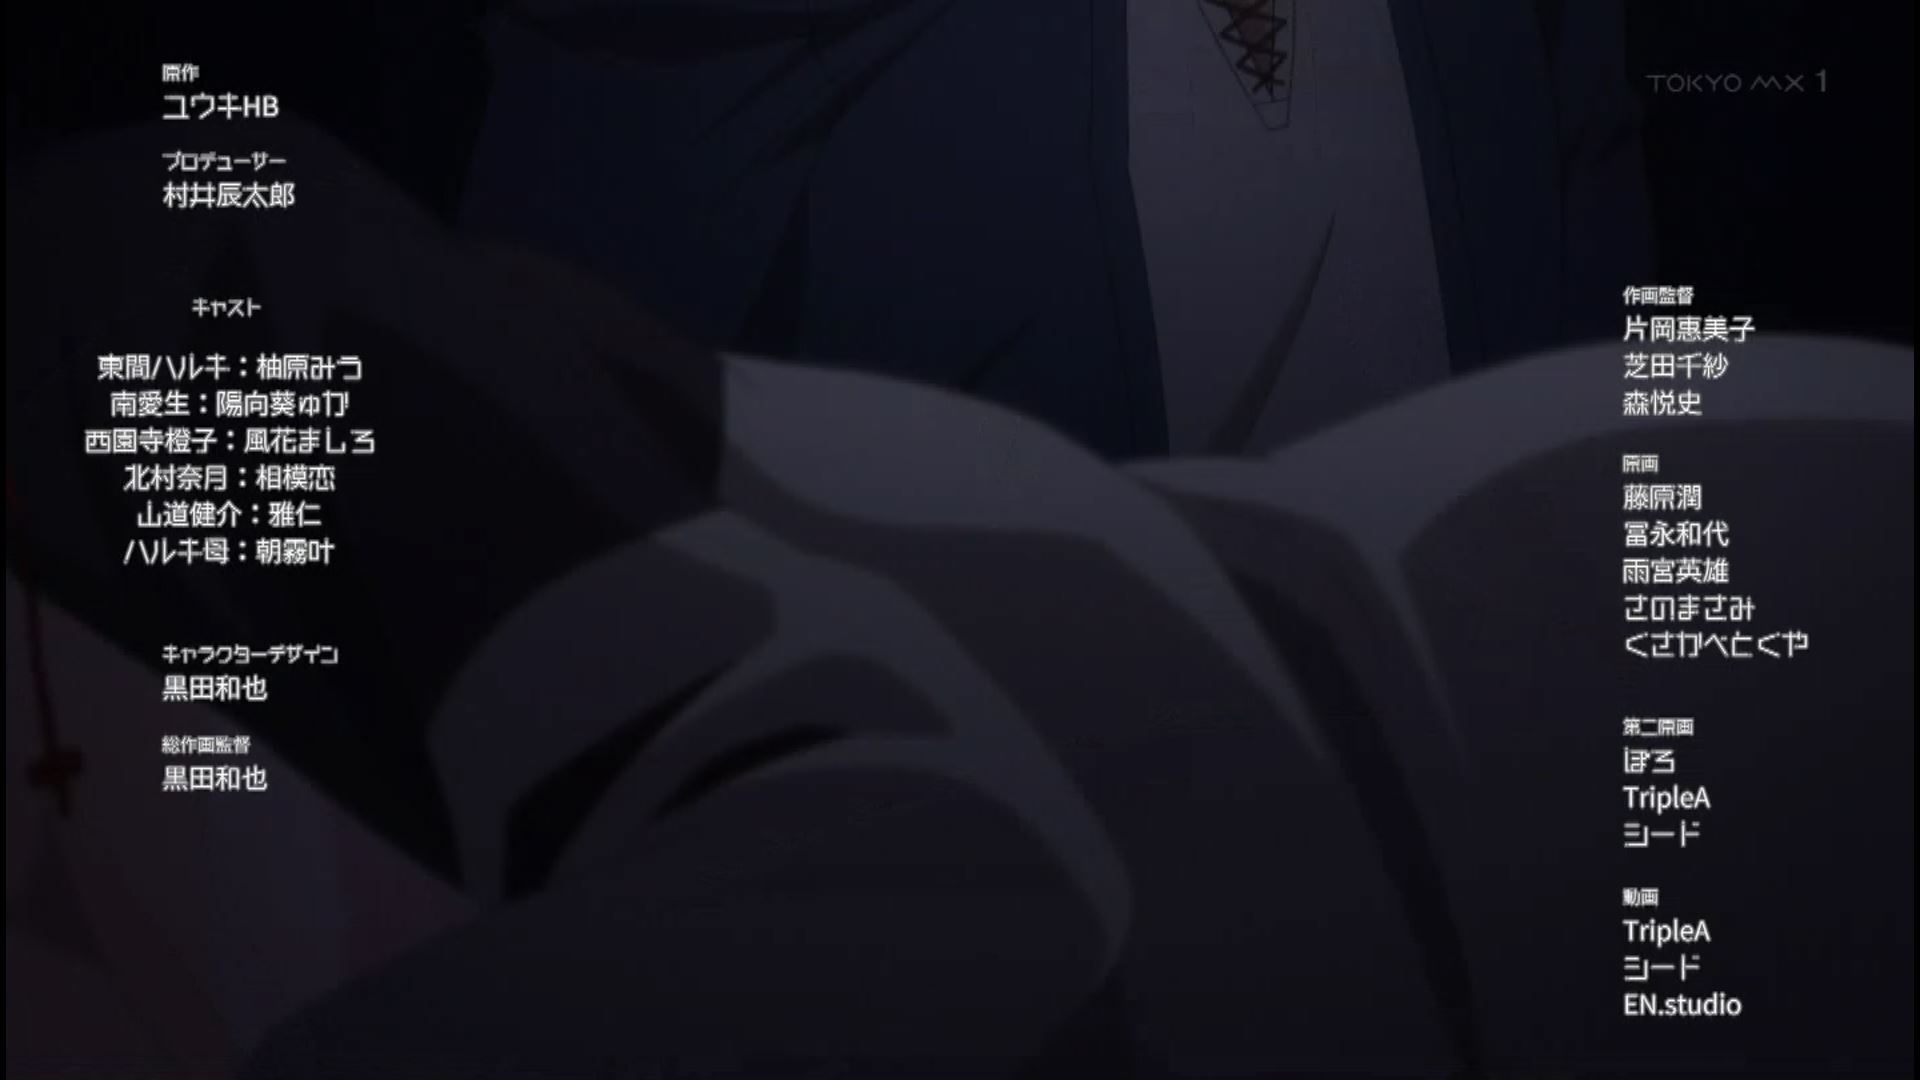 In the anime "Harlem Kyanpu!" episode 1, a girl stays in her uncle's tent and is attacked 17